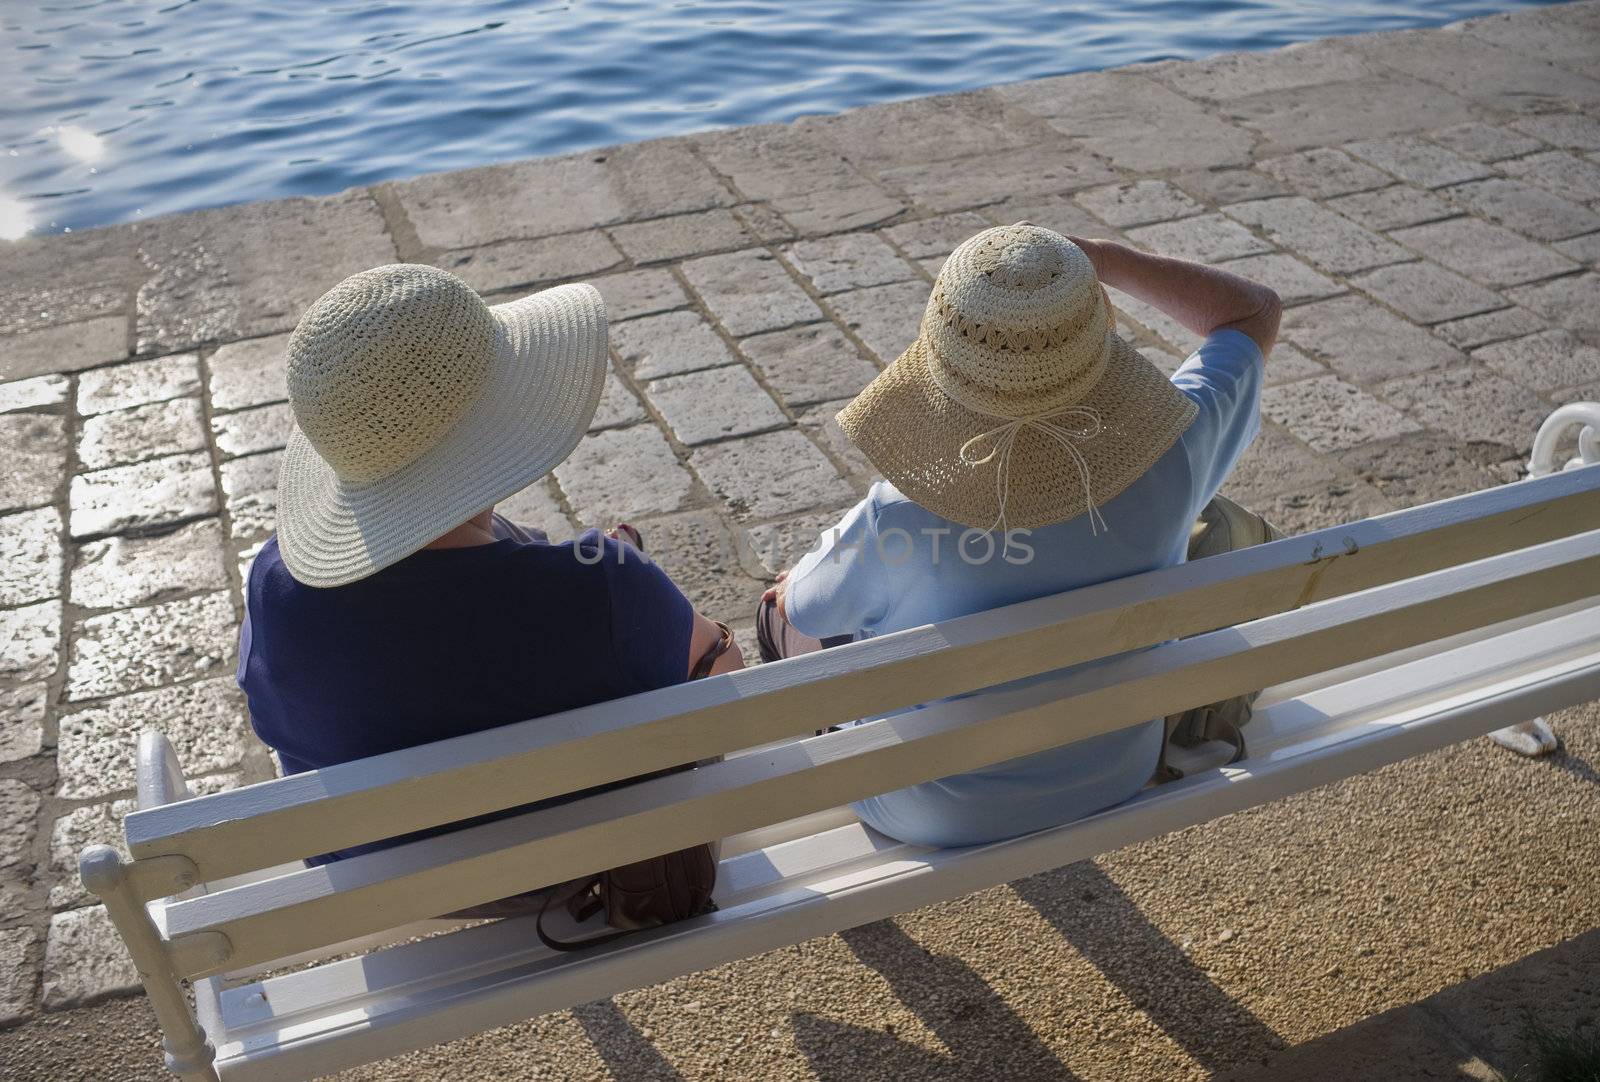 Two elderly females sitting and enjoying their vacation on a bench in the sun - Croatia.